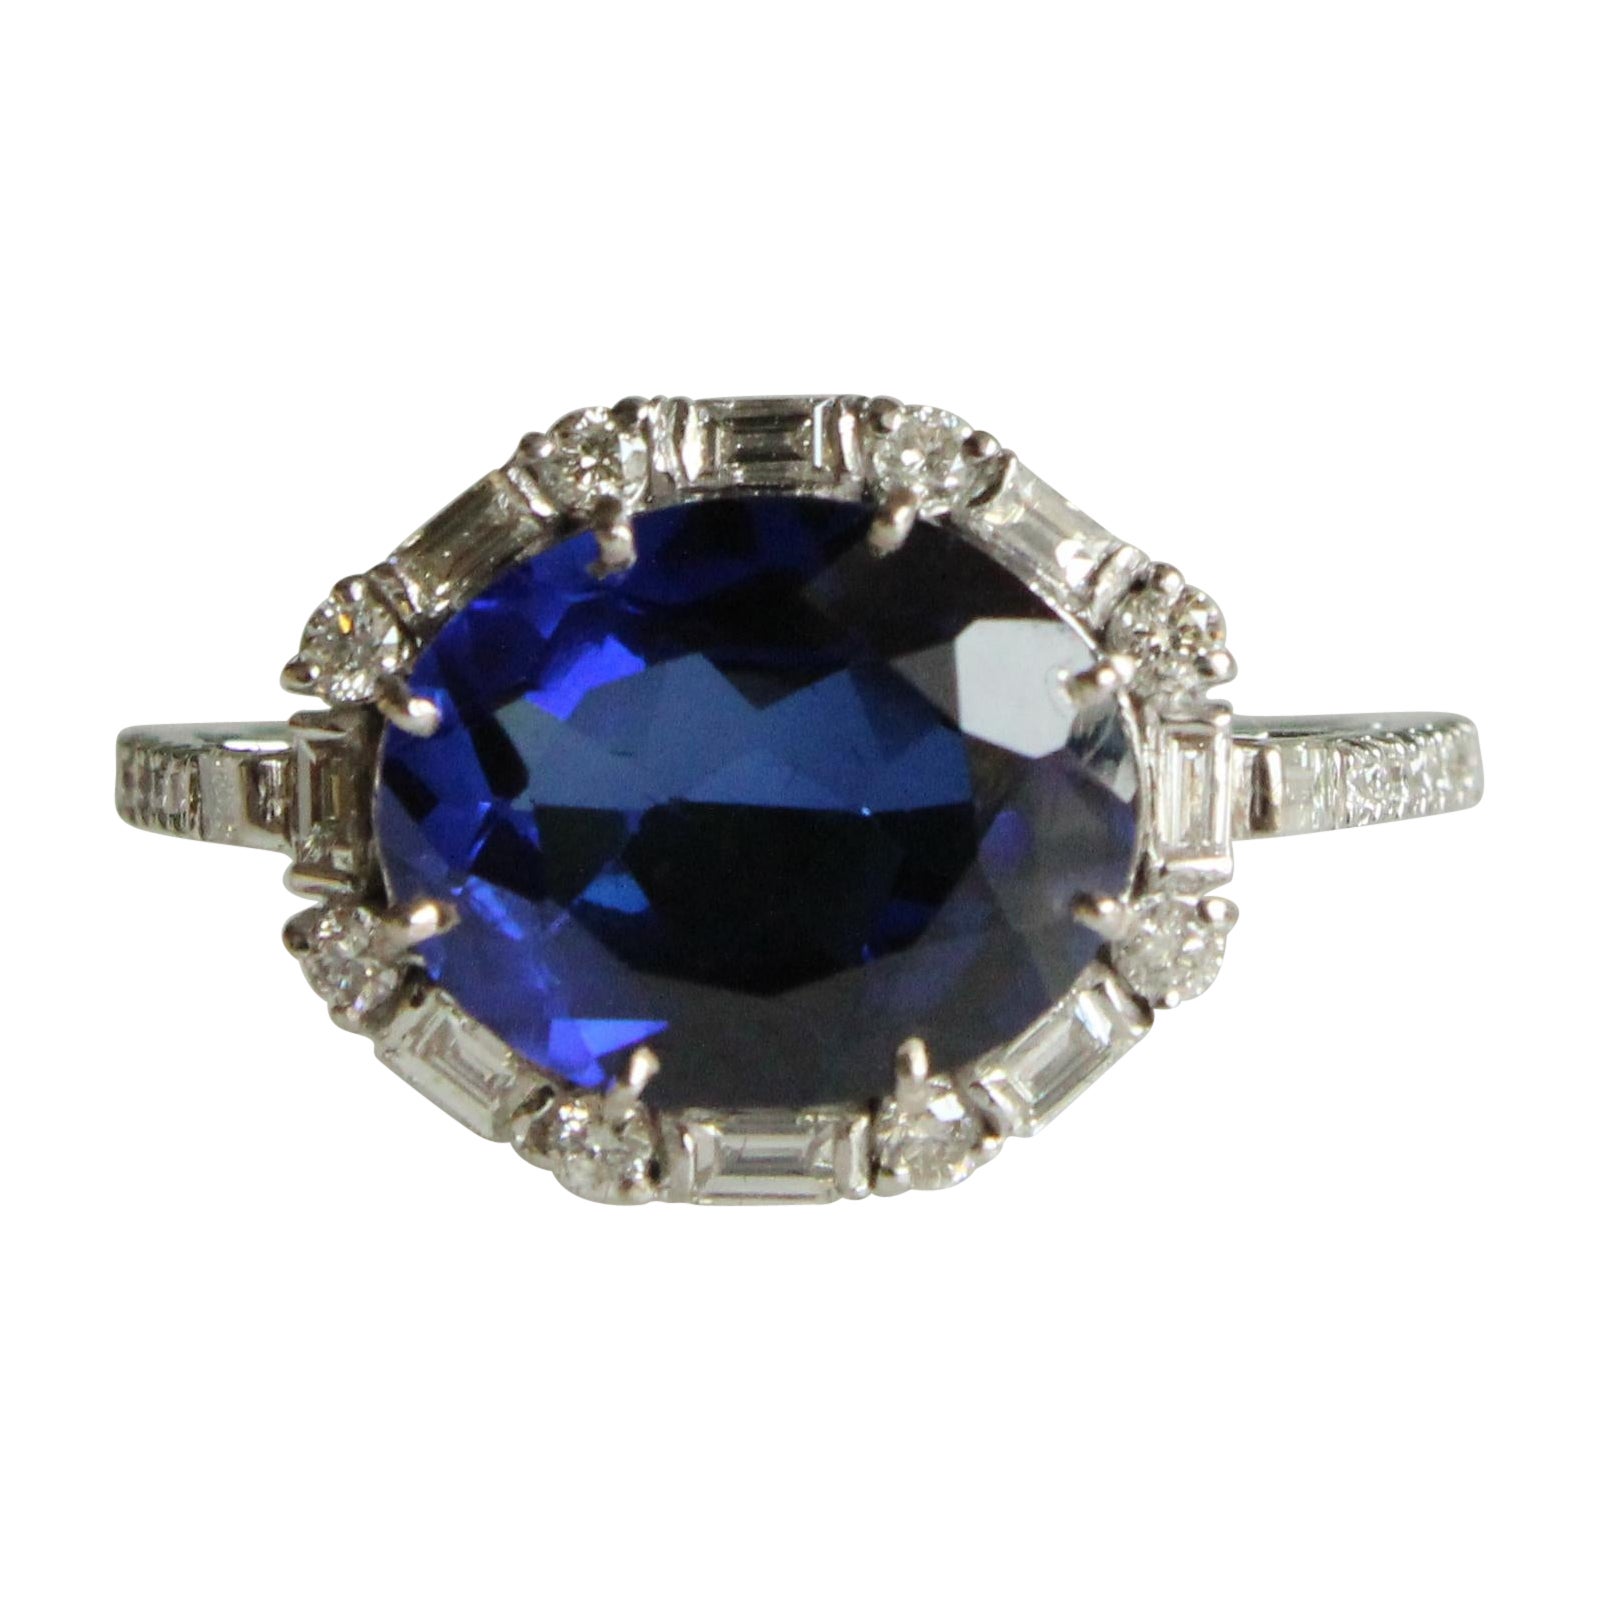 For Sale:  3-carat Oval Blue Sapphire and Diamonds Ring in 18k Solid Gold